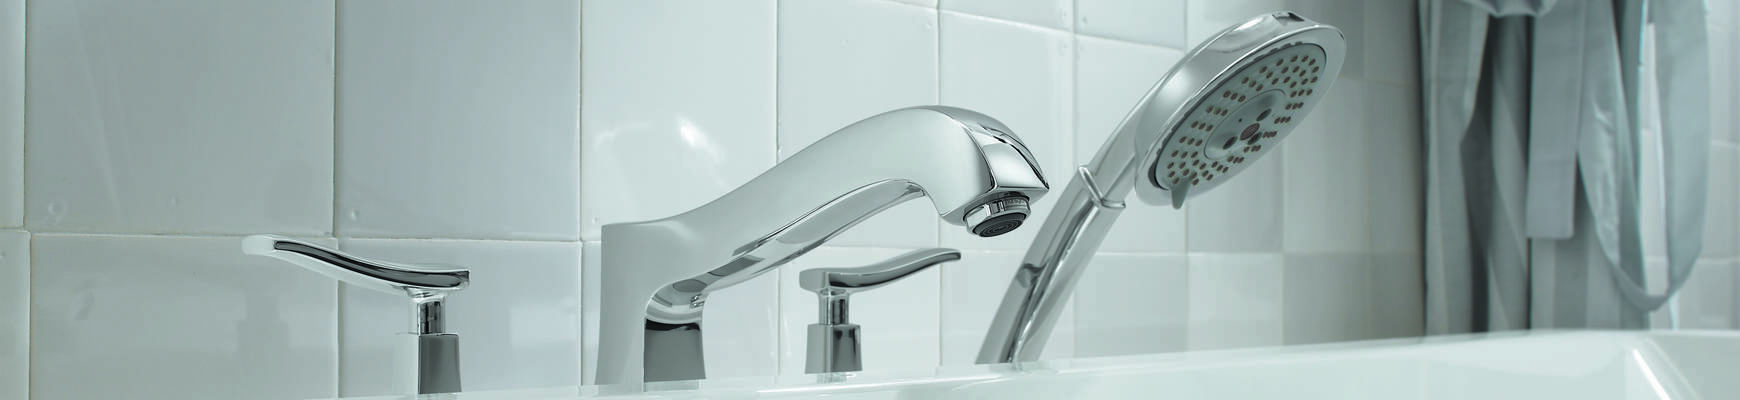 Bathtub Faucets Tub Fillers, How To Replace Stand Alone Bathtub Faucet